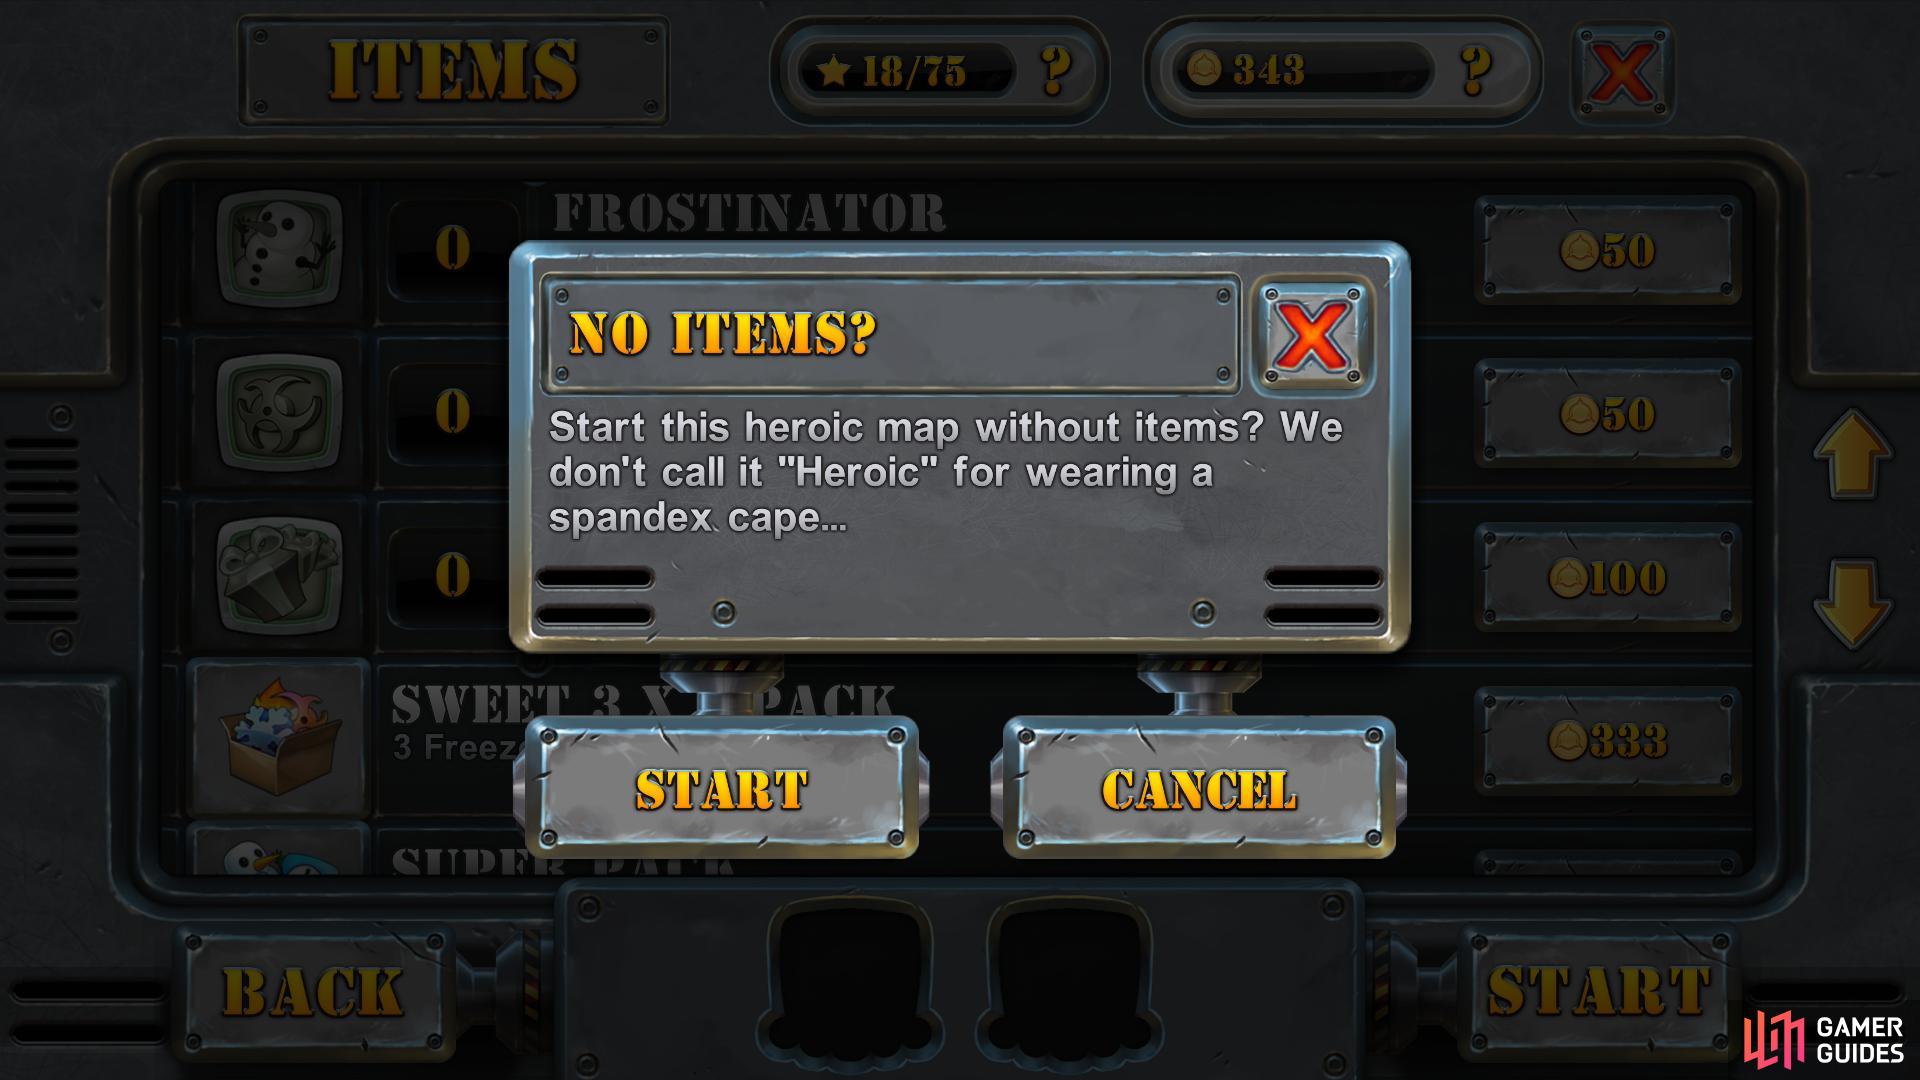 Don’t rule out using items just because they costs coins. They’ll help you out in many a pickle.